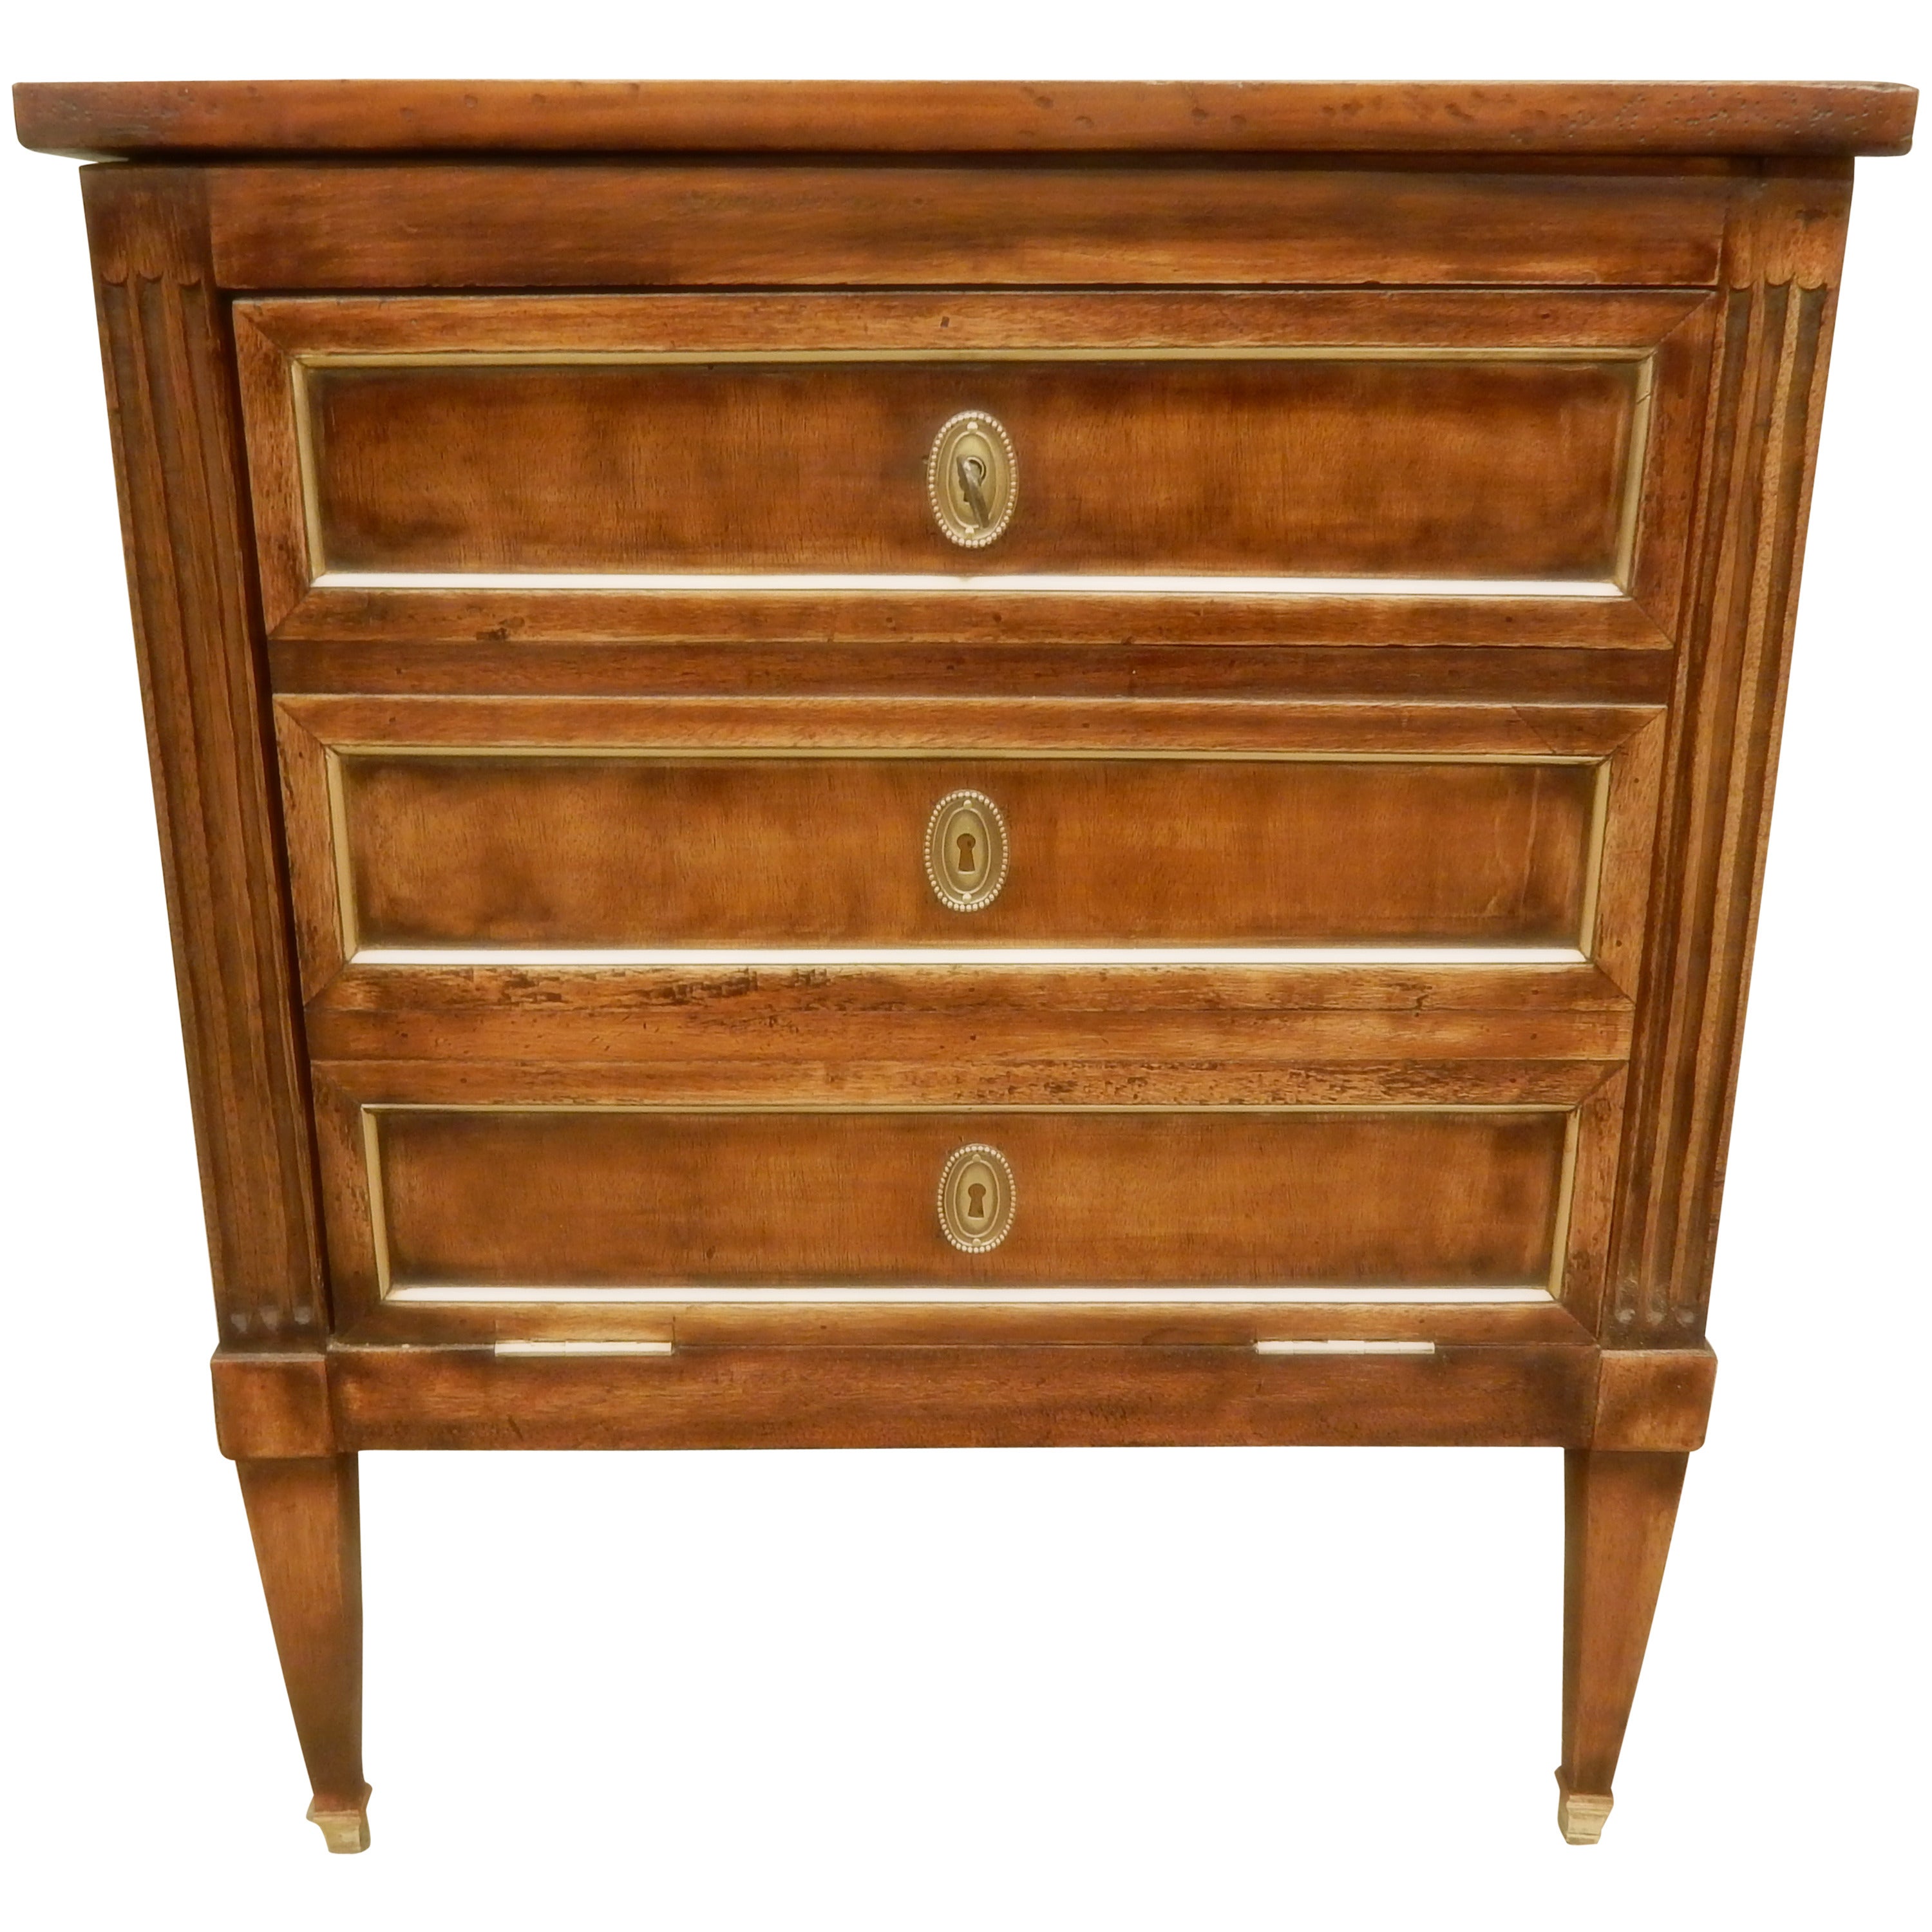 19th c Louis XVI style fall front commode. For Sale